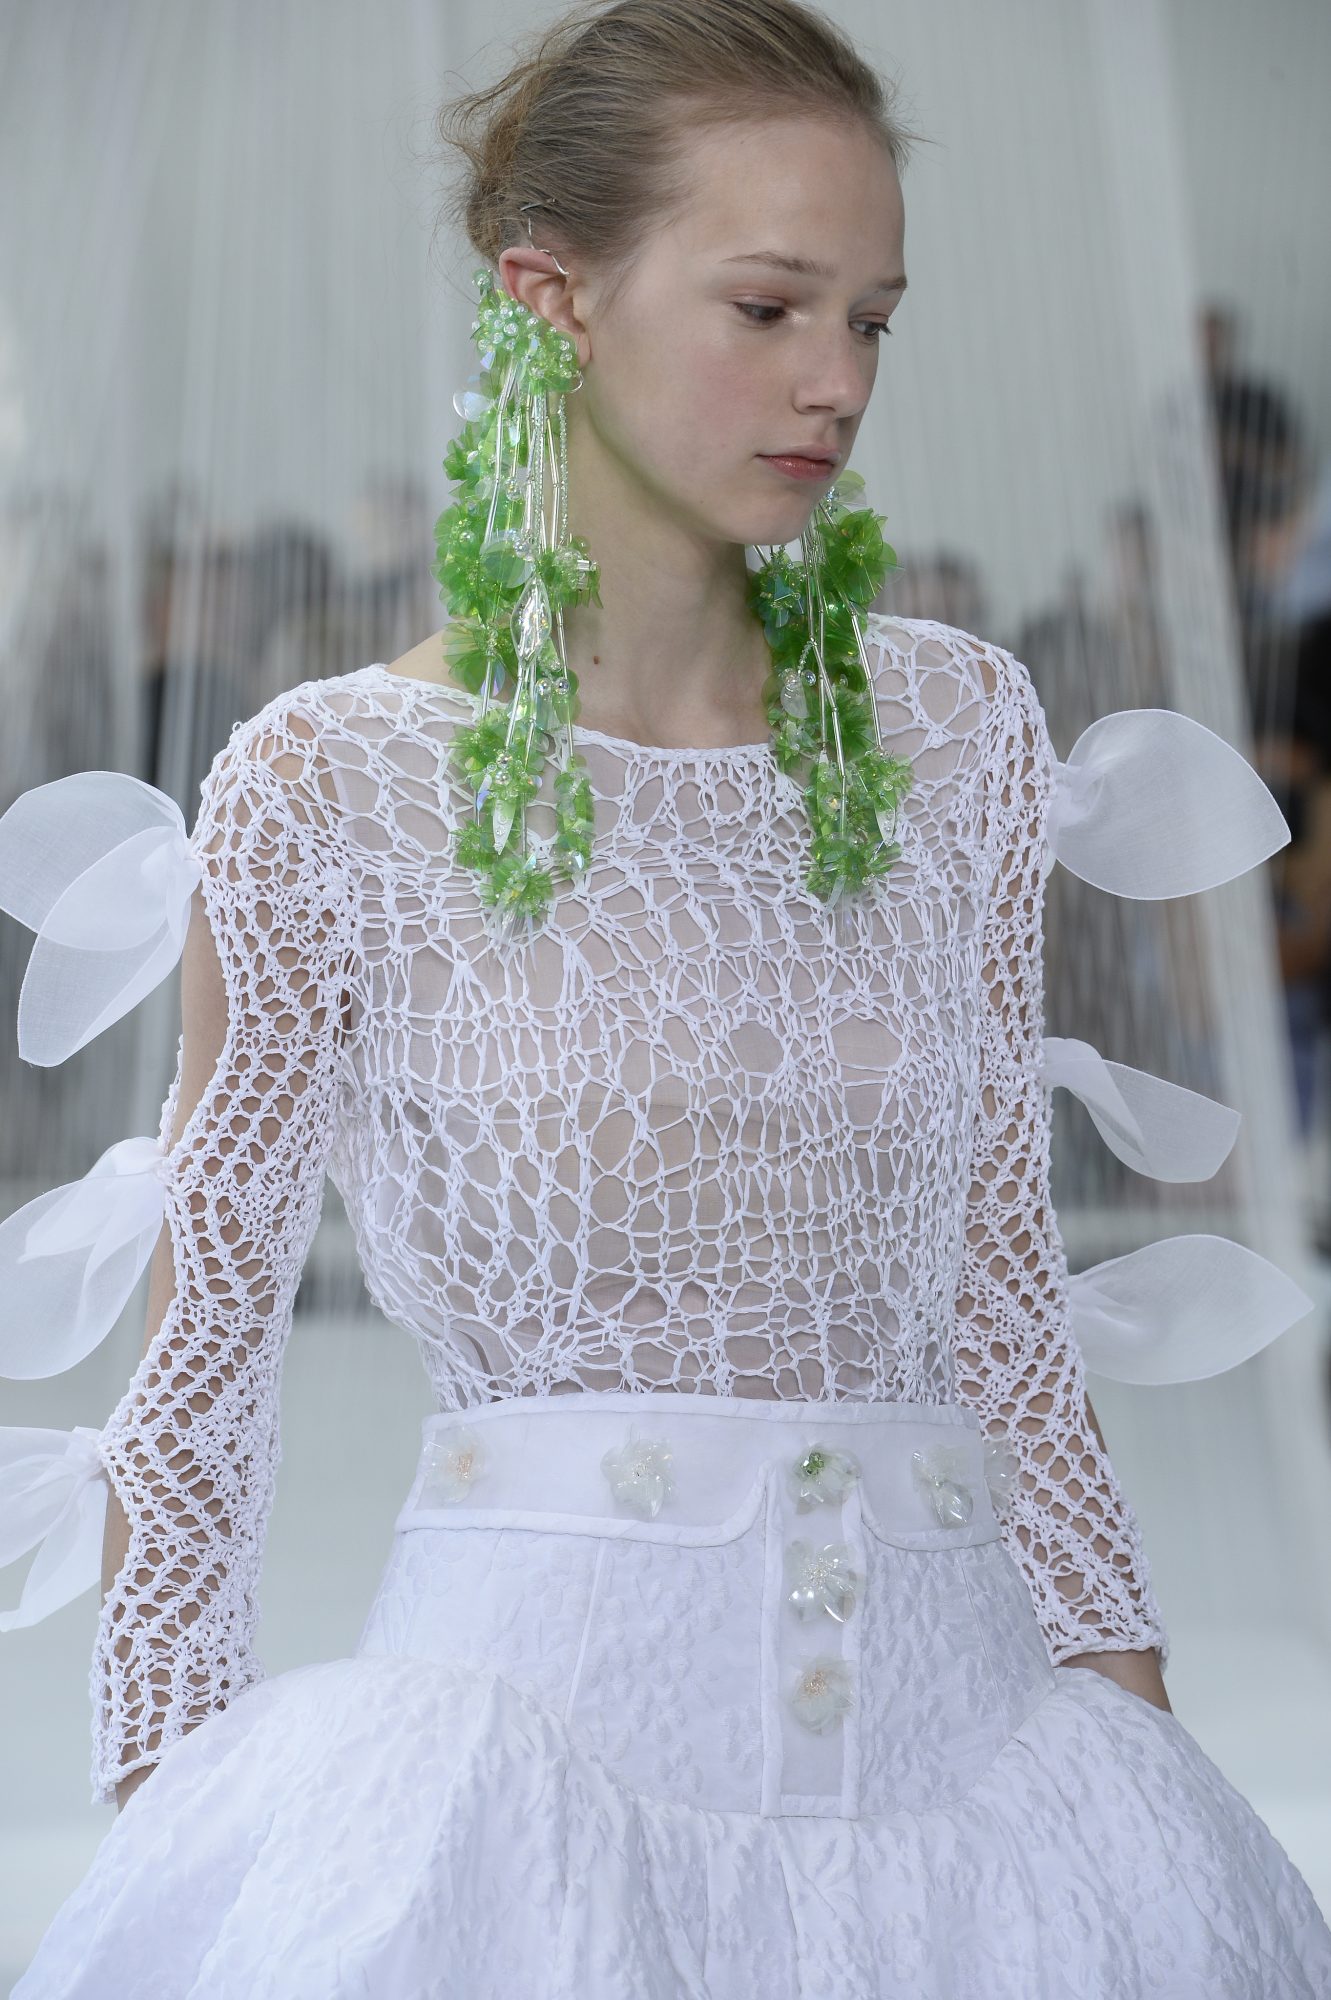 Majorly swooning over these intense icicle-inspired earrings at NYFW ...